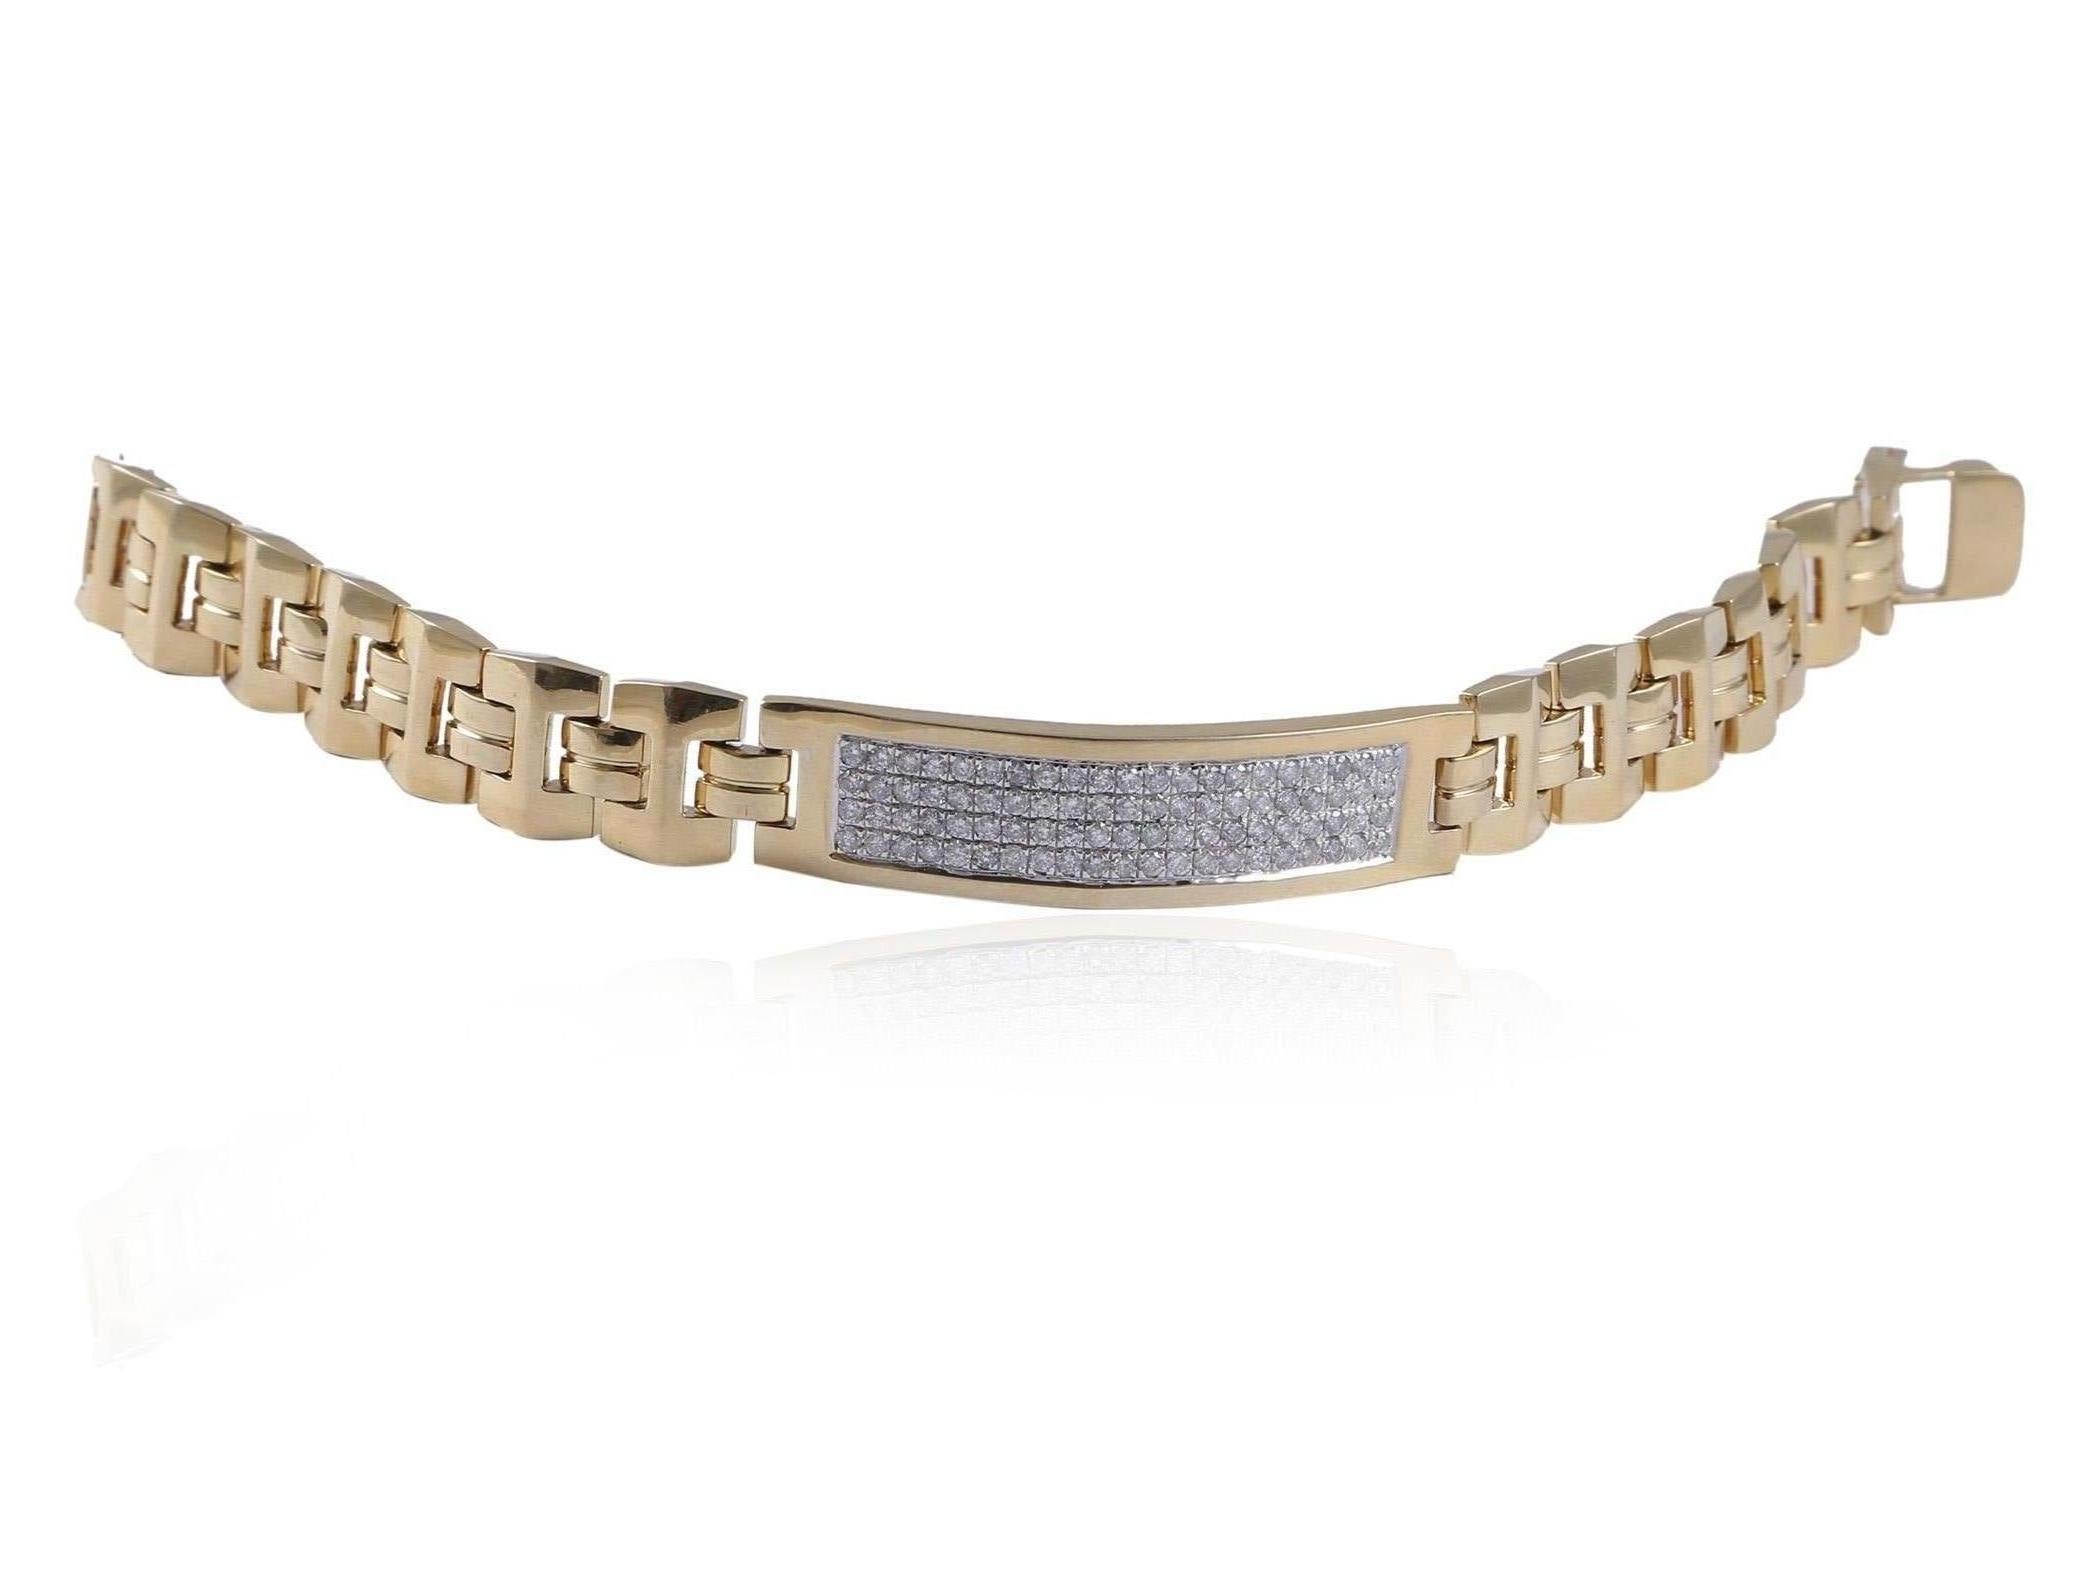 Take home this dazzling and shimmering masterpiece crafted with 1.92 carats of round diamonds in a men's tennis bracelet design. Fashioned from 14K gold, it's an ideal choice for a memorable gift, sure to leave a lasting